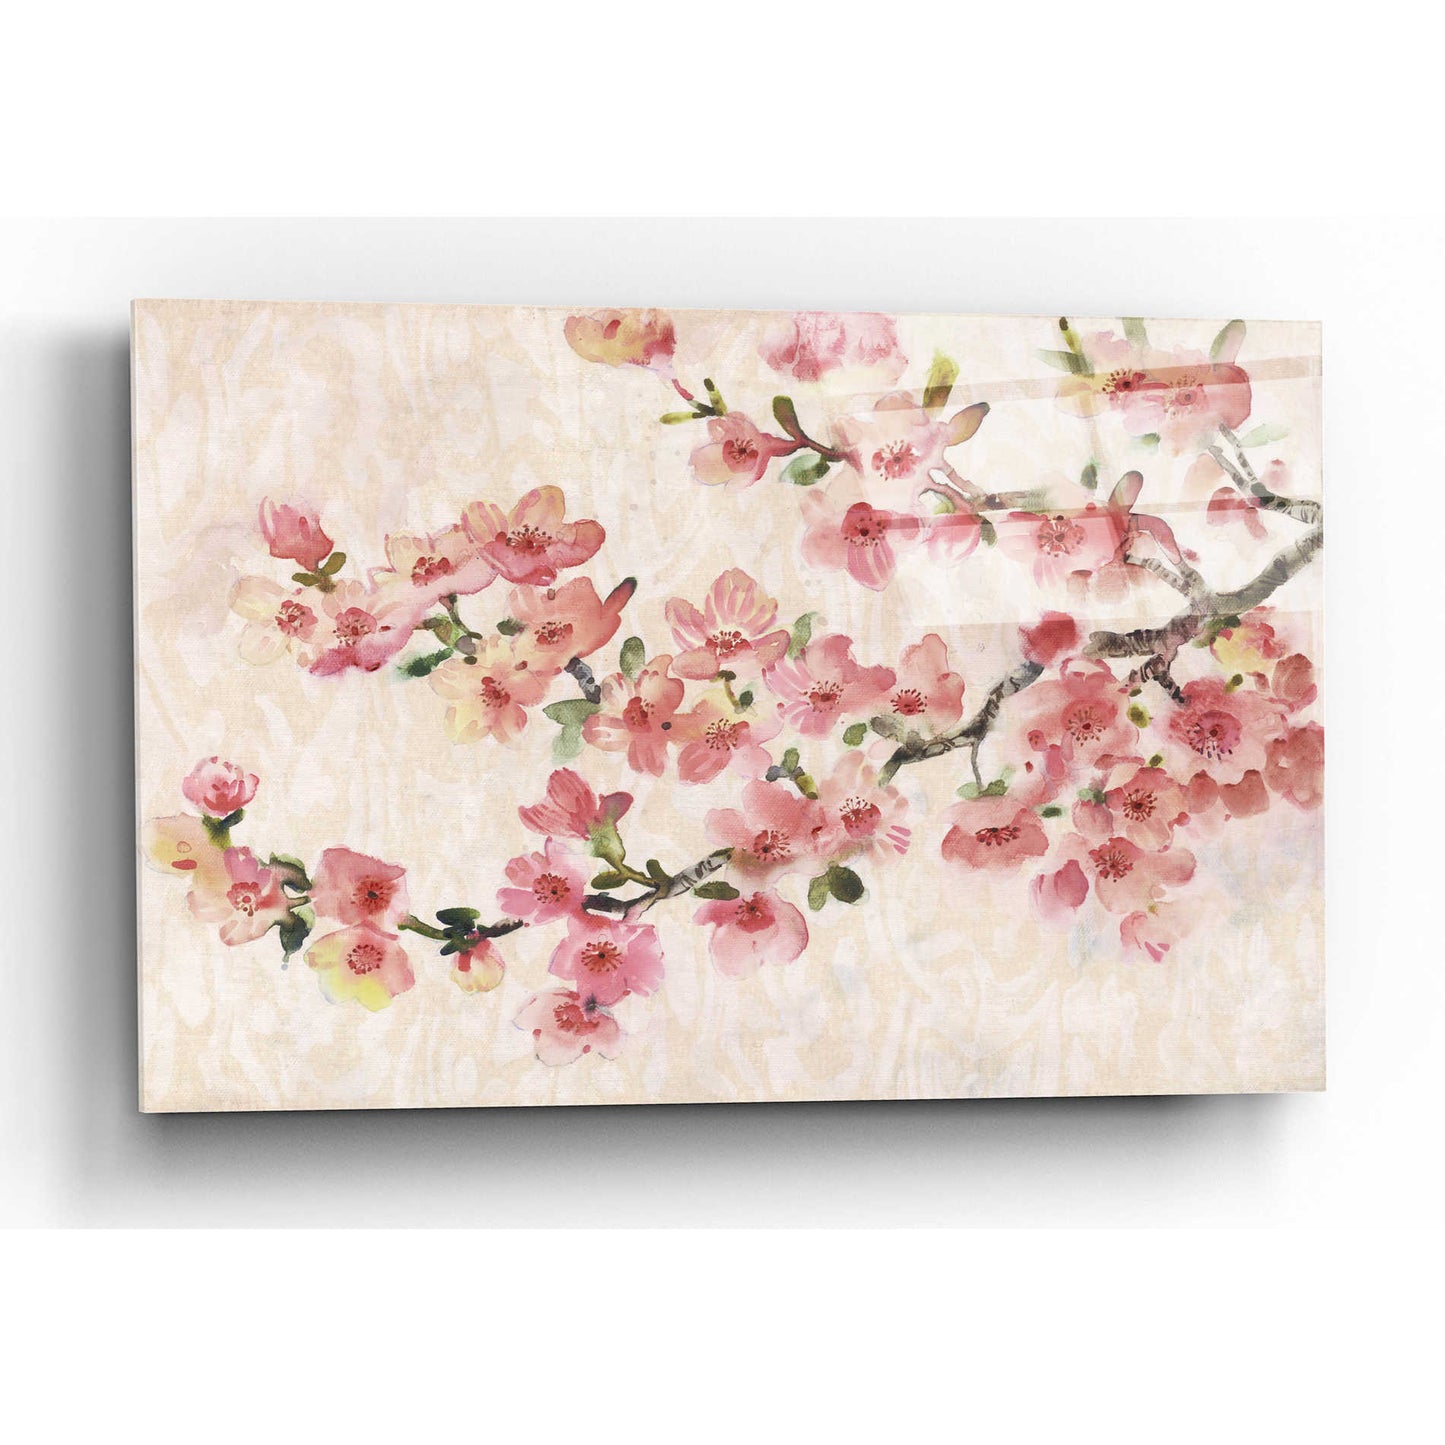 Epic Art 'Cherry Blossom Composition I' by Tim O'Toole, Acrylic Glass Wall Art